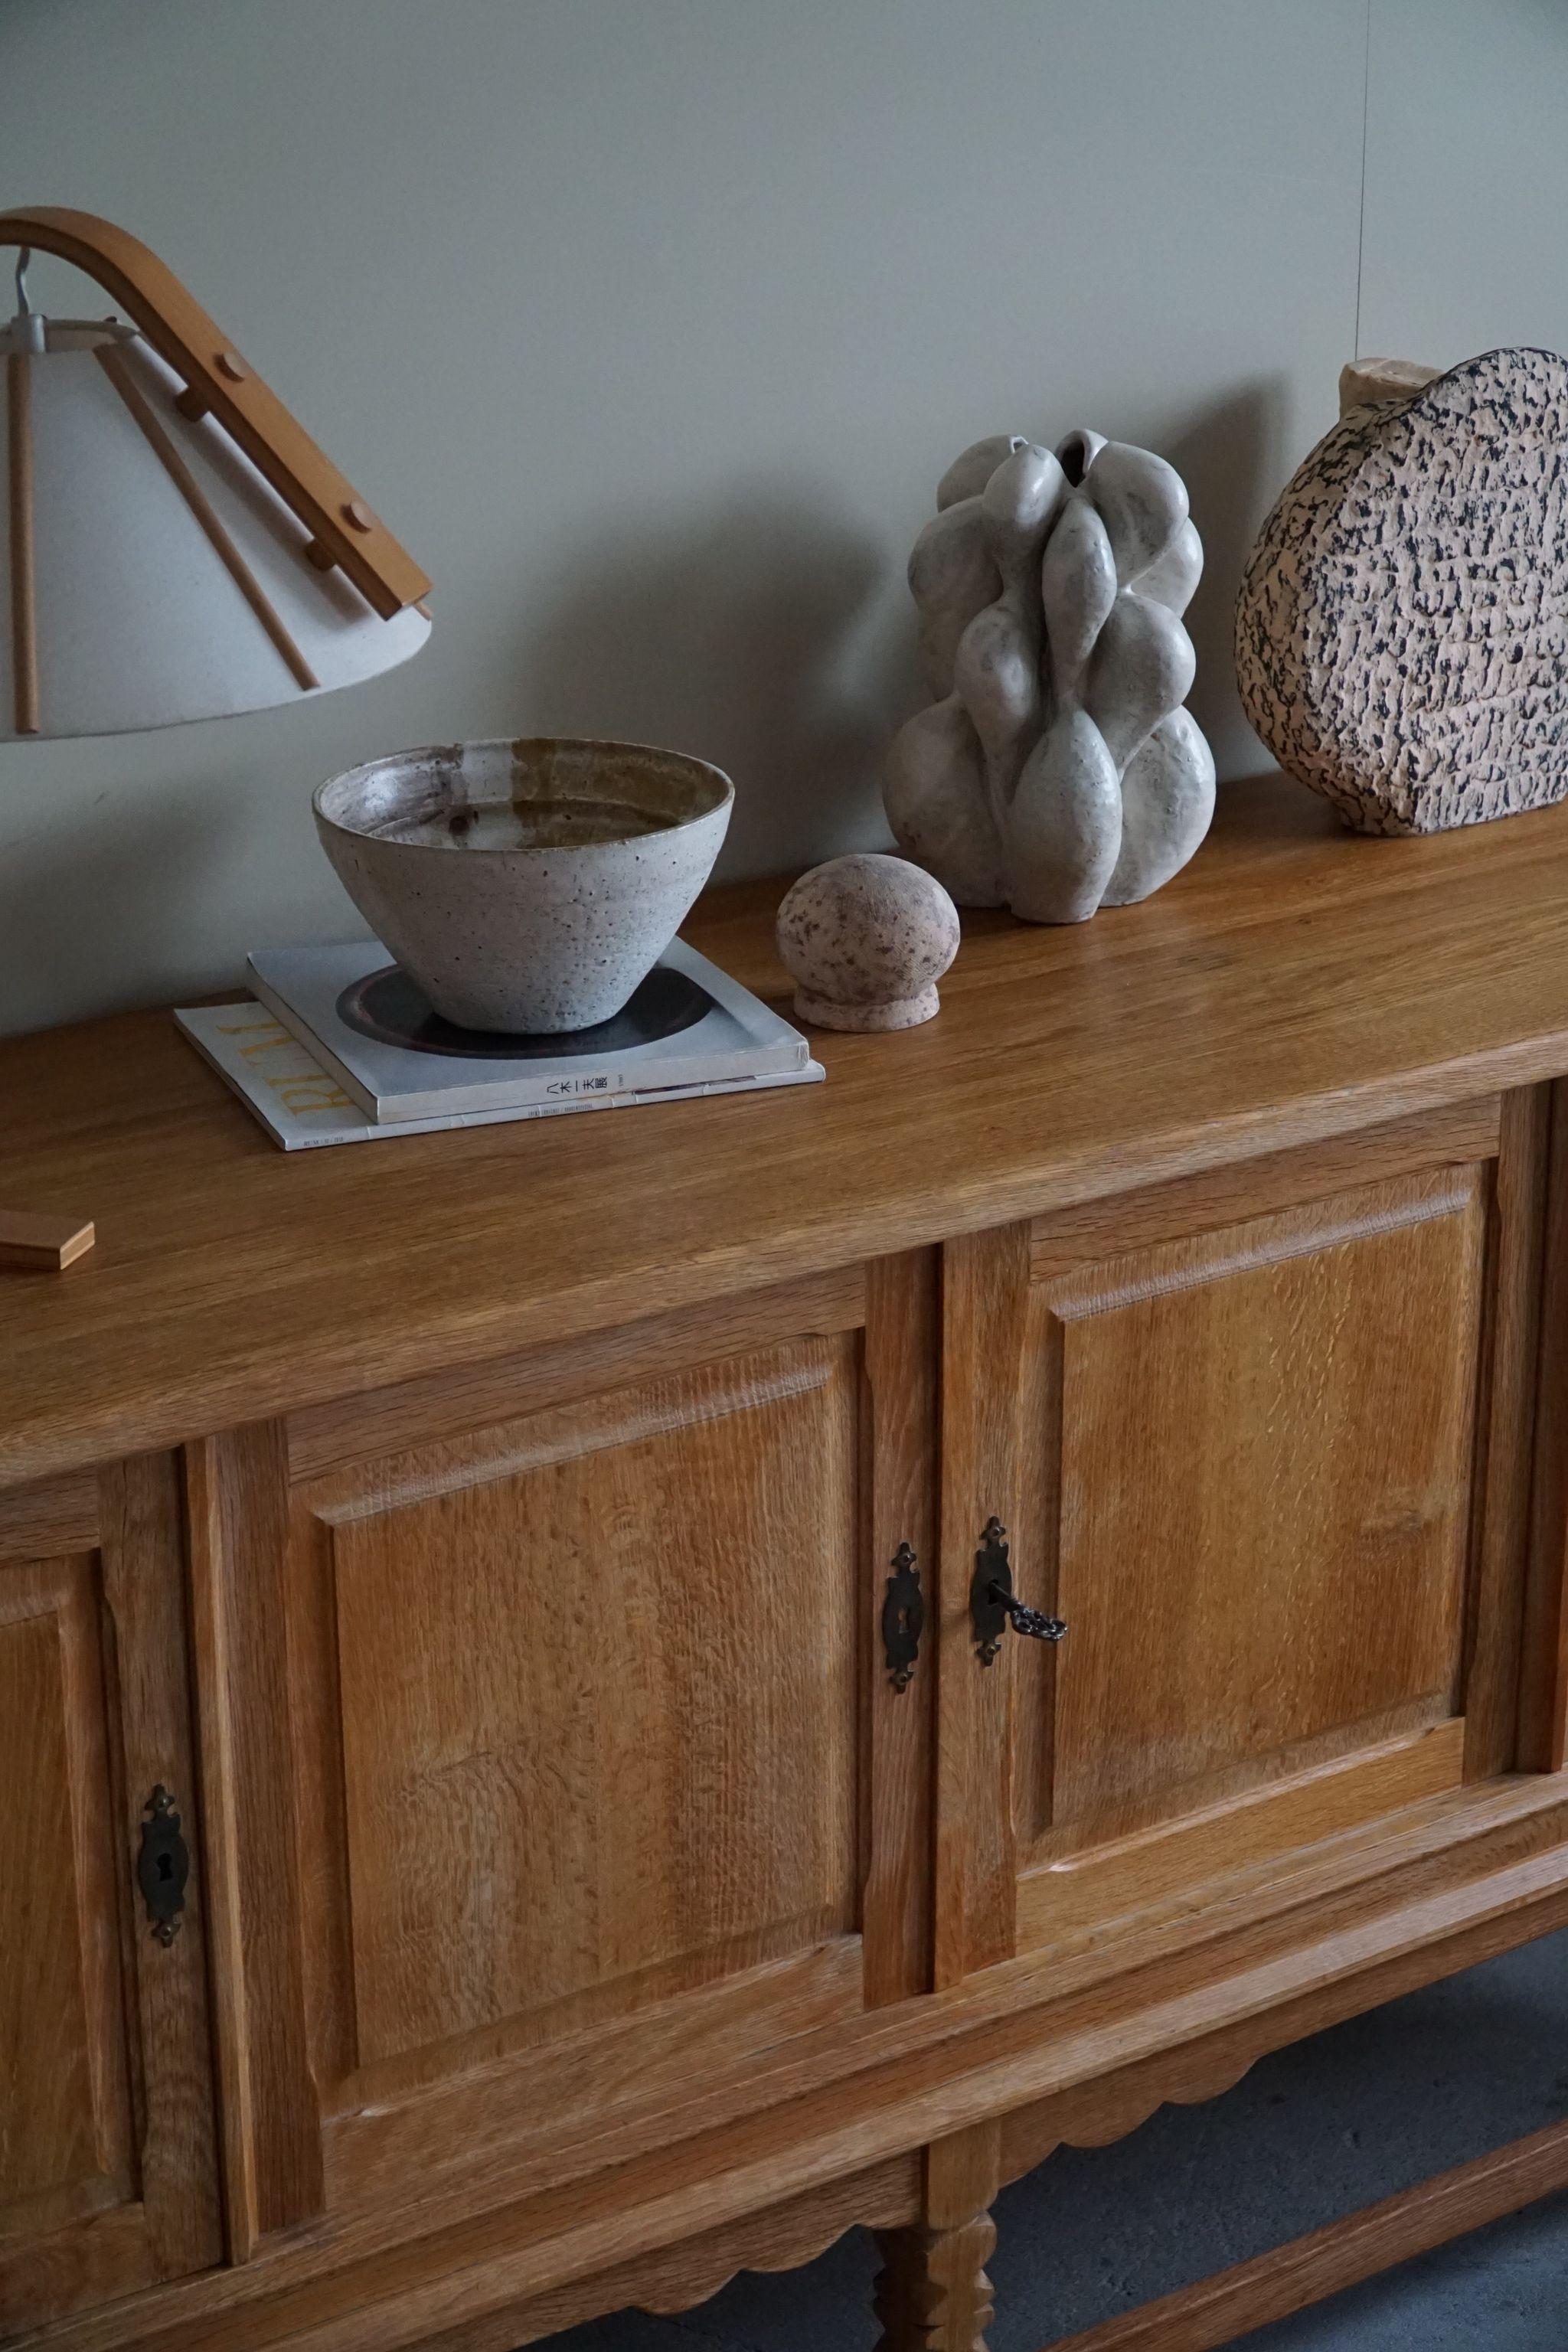 20th Century Sideboard in Oak, Made by a Danish Cabinetmaker, Mid Ccentury Modern, 1960s